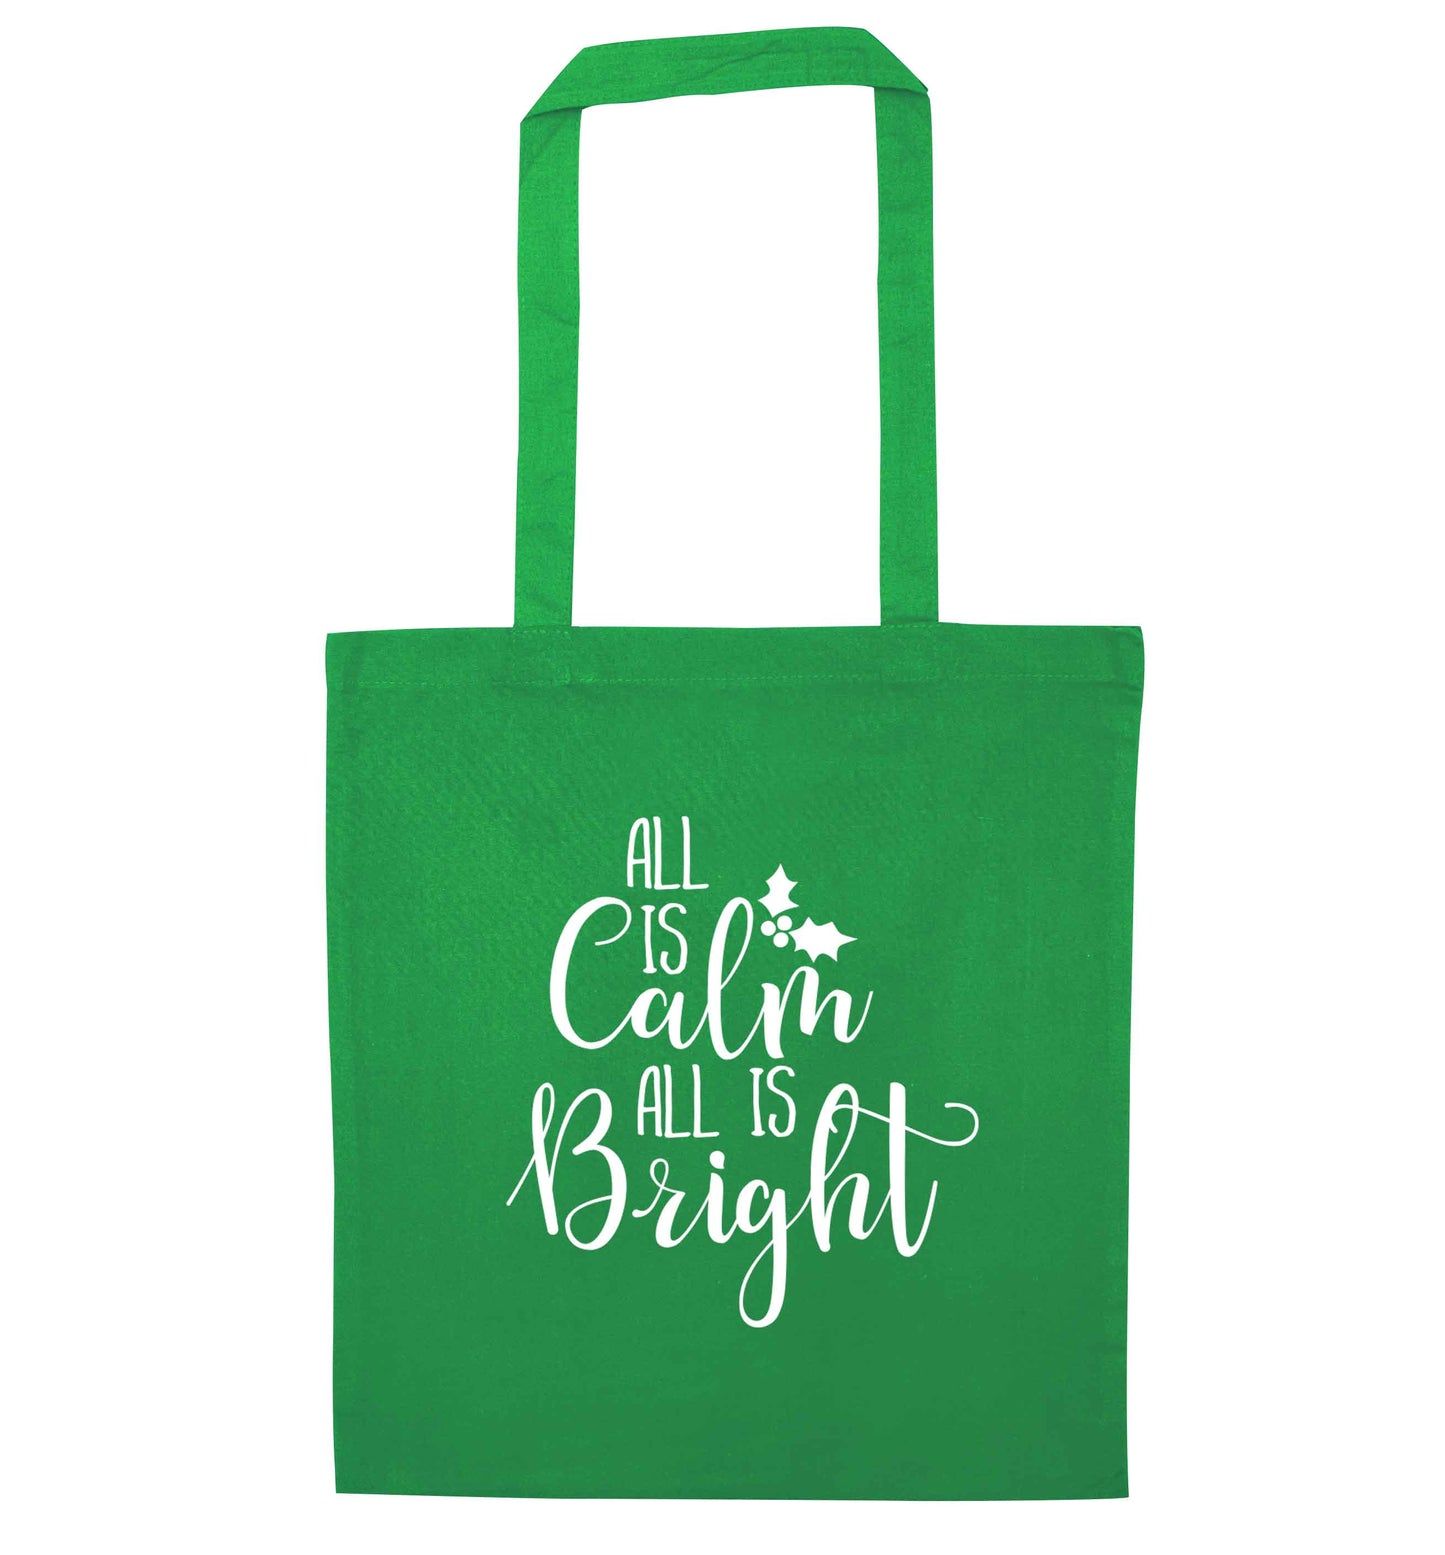 All is calm is bright green tote bag